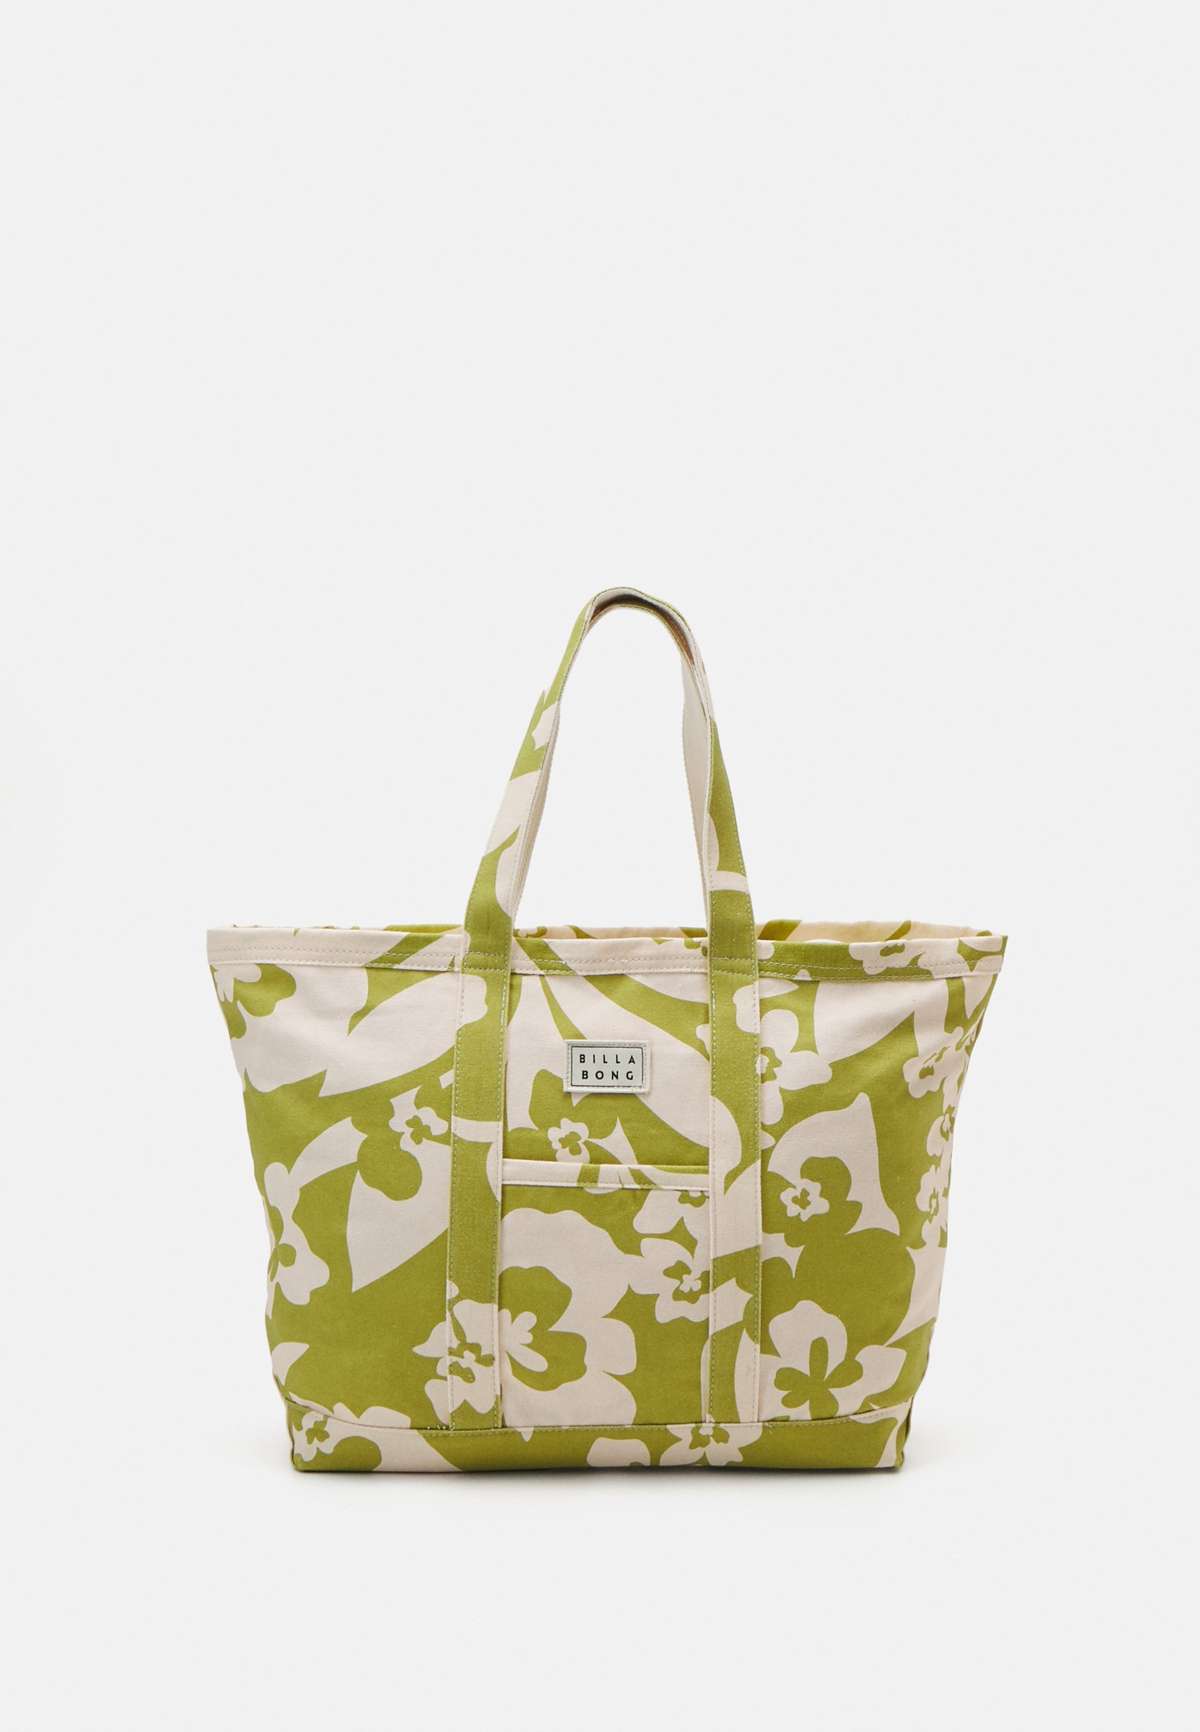 ALL DAY BEACH TOTE UNISEX - Shopping Bag ALL DAY BEACH TOTE UNISEX